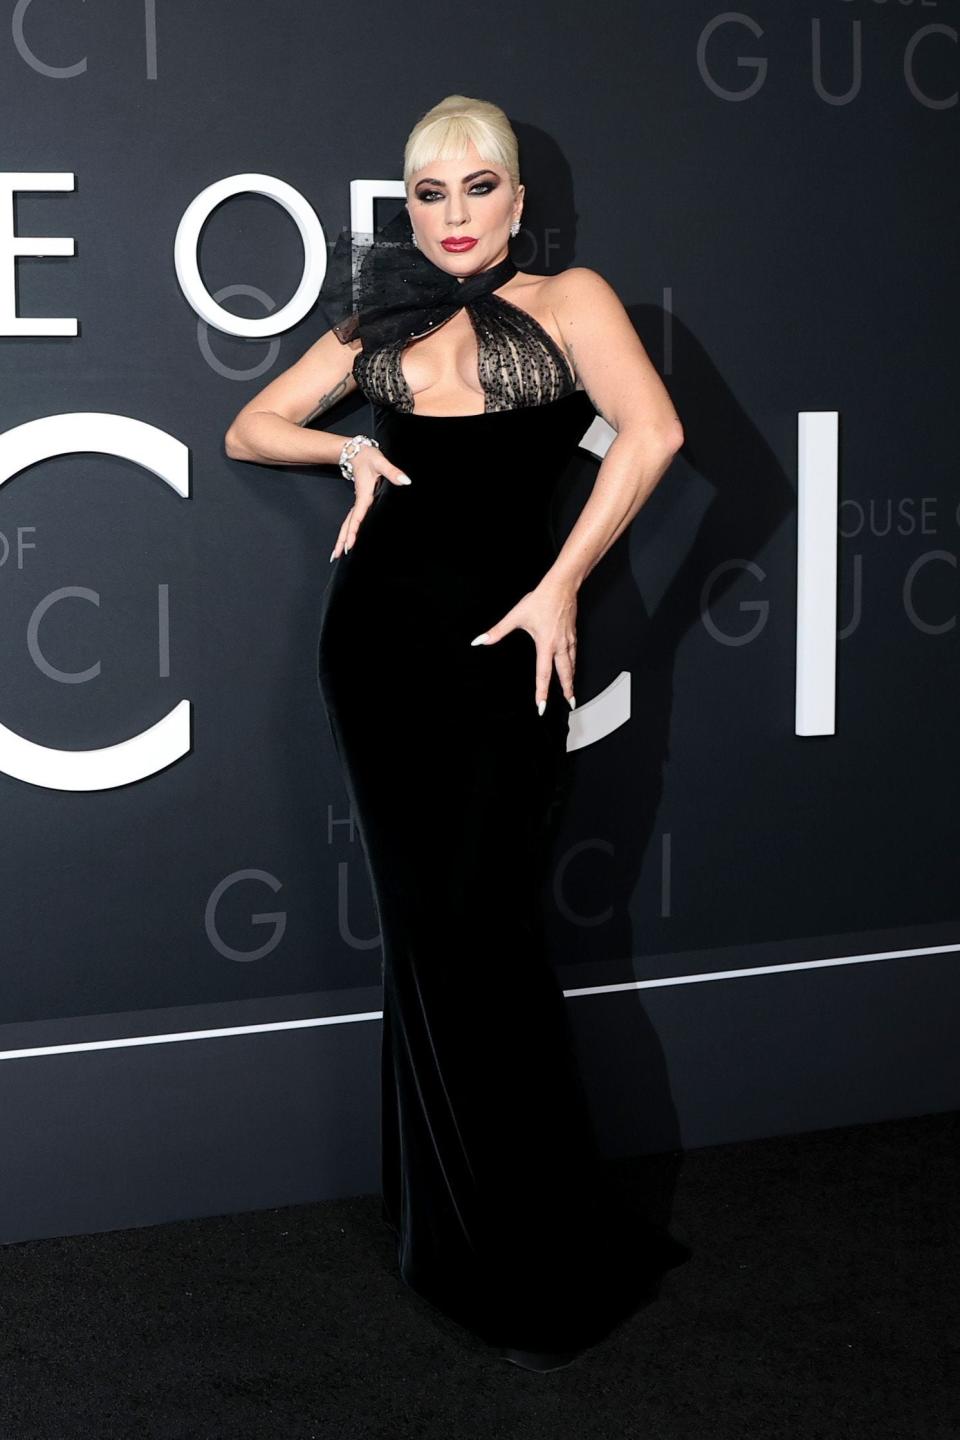 Lady Gaga wore a custom Armani Prive gown to the New York premiere of "House of Gucci."